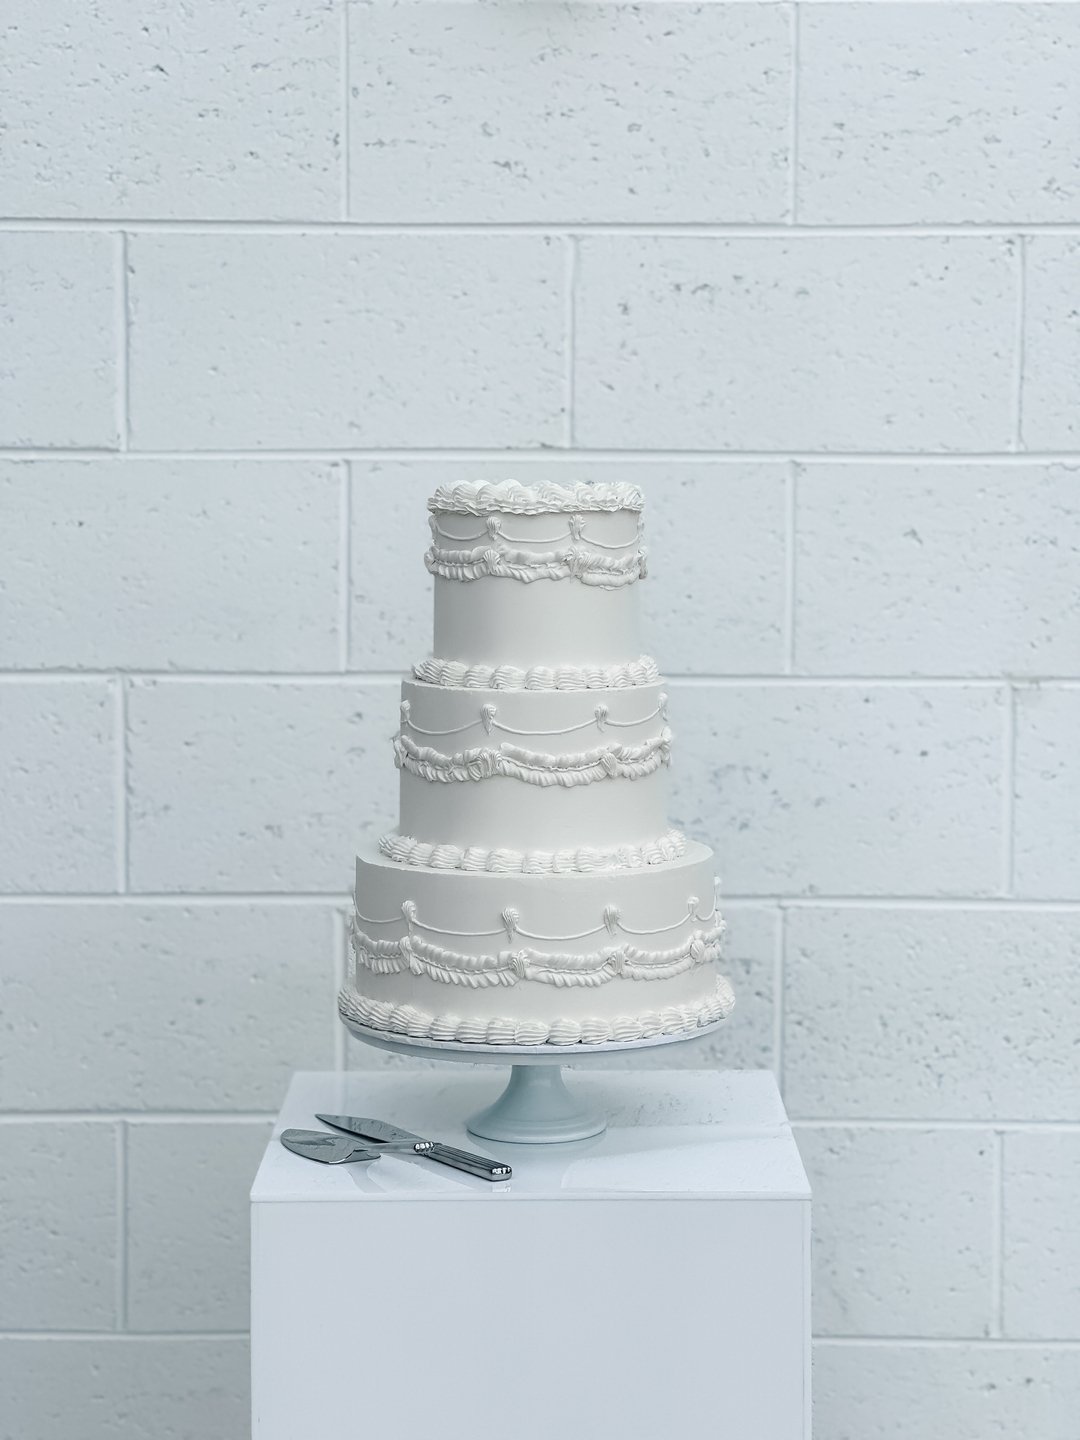 Lambeth Beauty 💞// 
Summer Love for Isabella &amp; Hugh, who were married at @assemblyyard in December 💞

While we've only crafted a few &quot;Lambeth Style&quot; Cakes, this one is truly special and reflects the elegance of our style at Sieve &amp